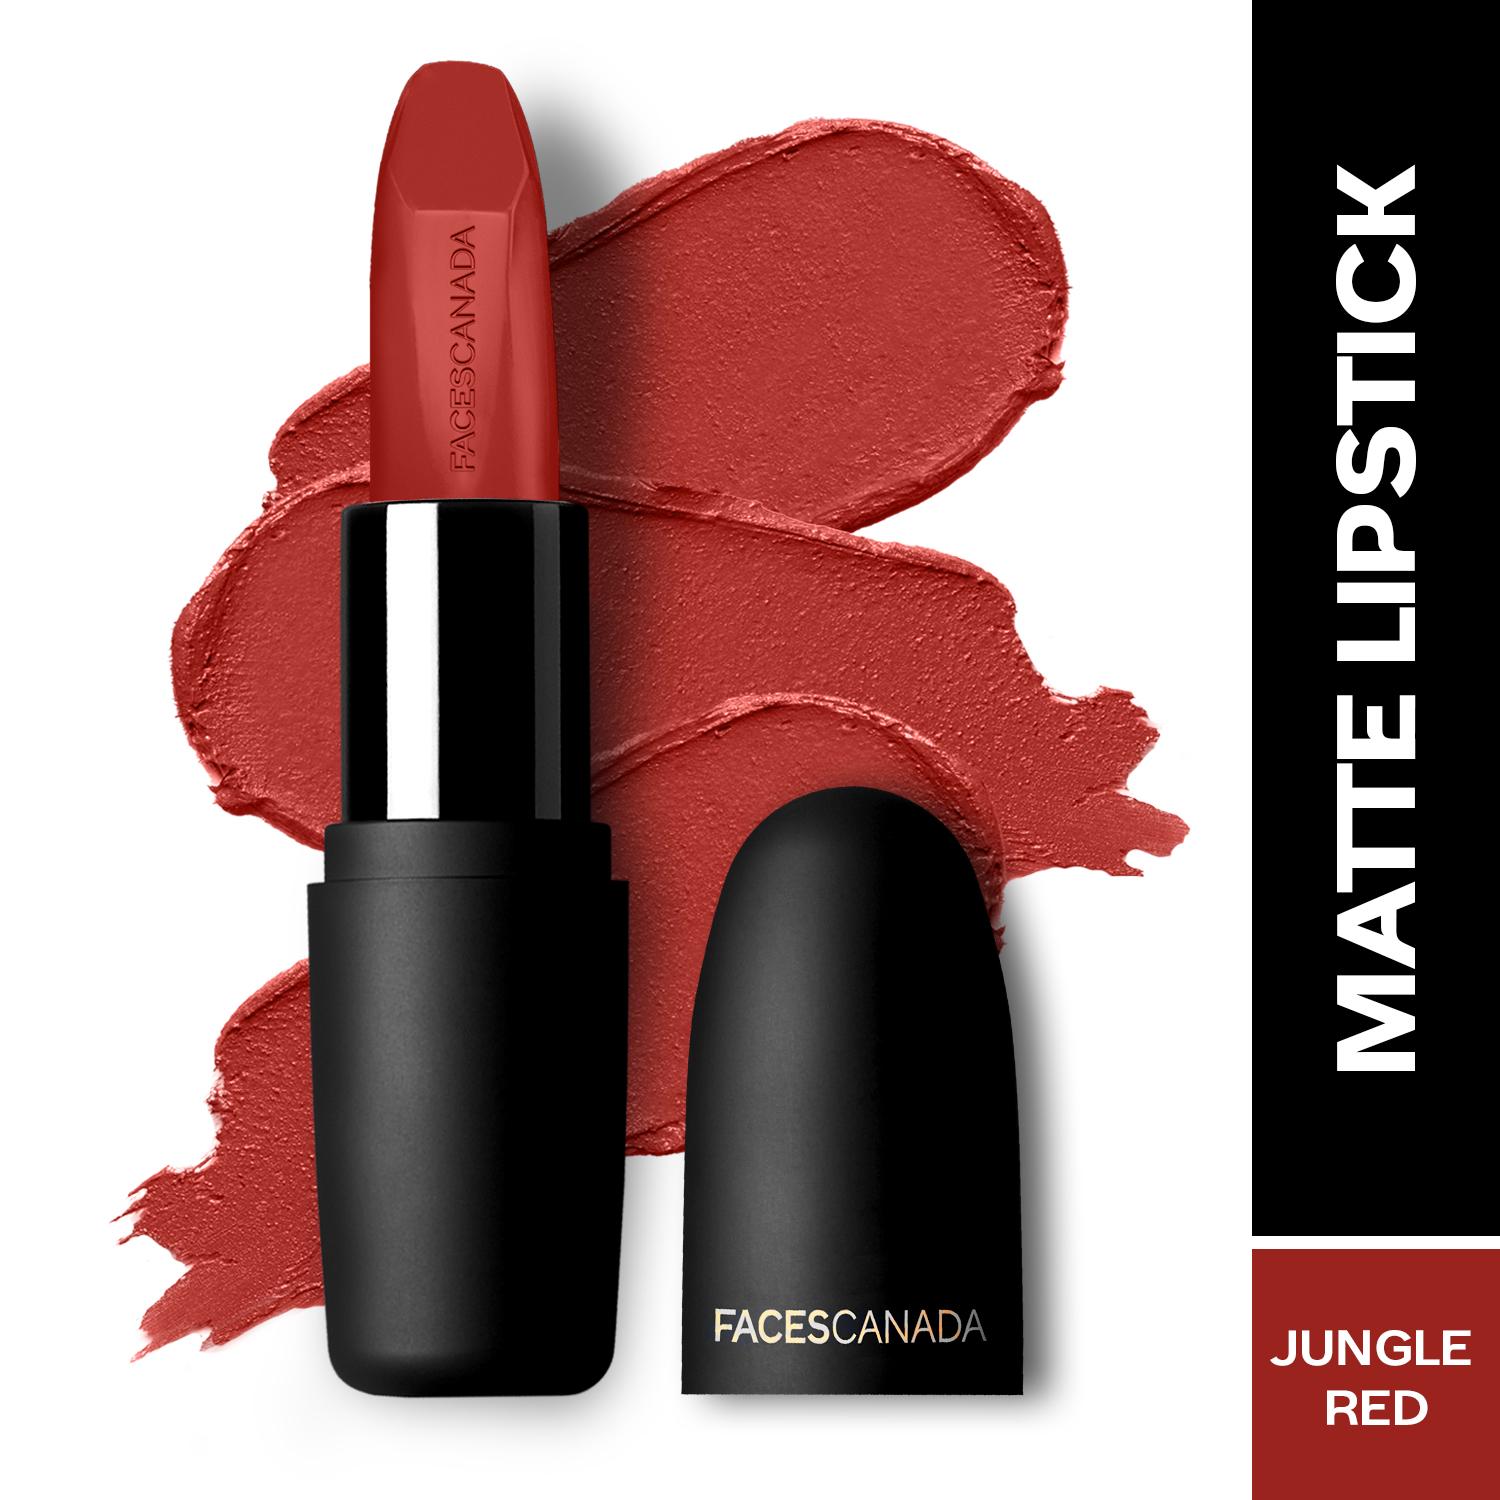 Faces Canada Weightless Matte Lipstick, Pigmented and Hydrated Lips - Jungle Red 29 (4.5 g)